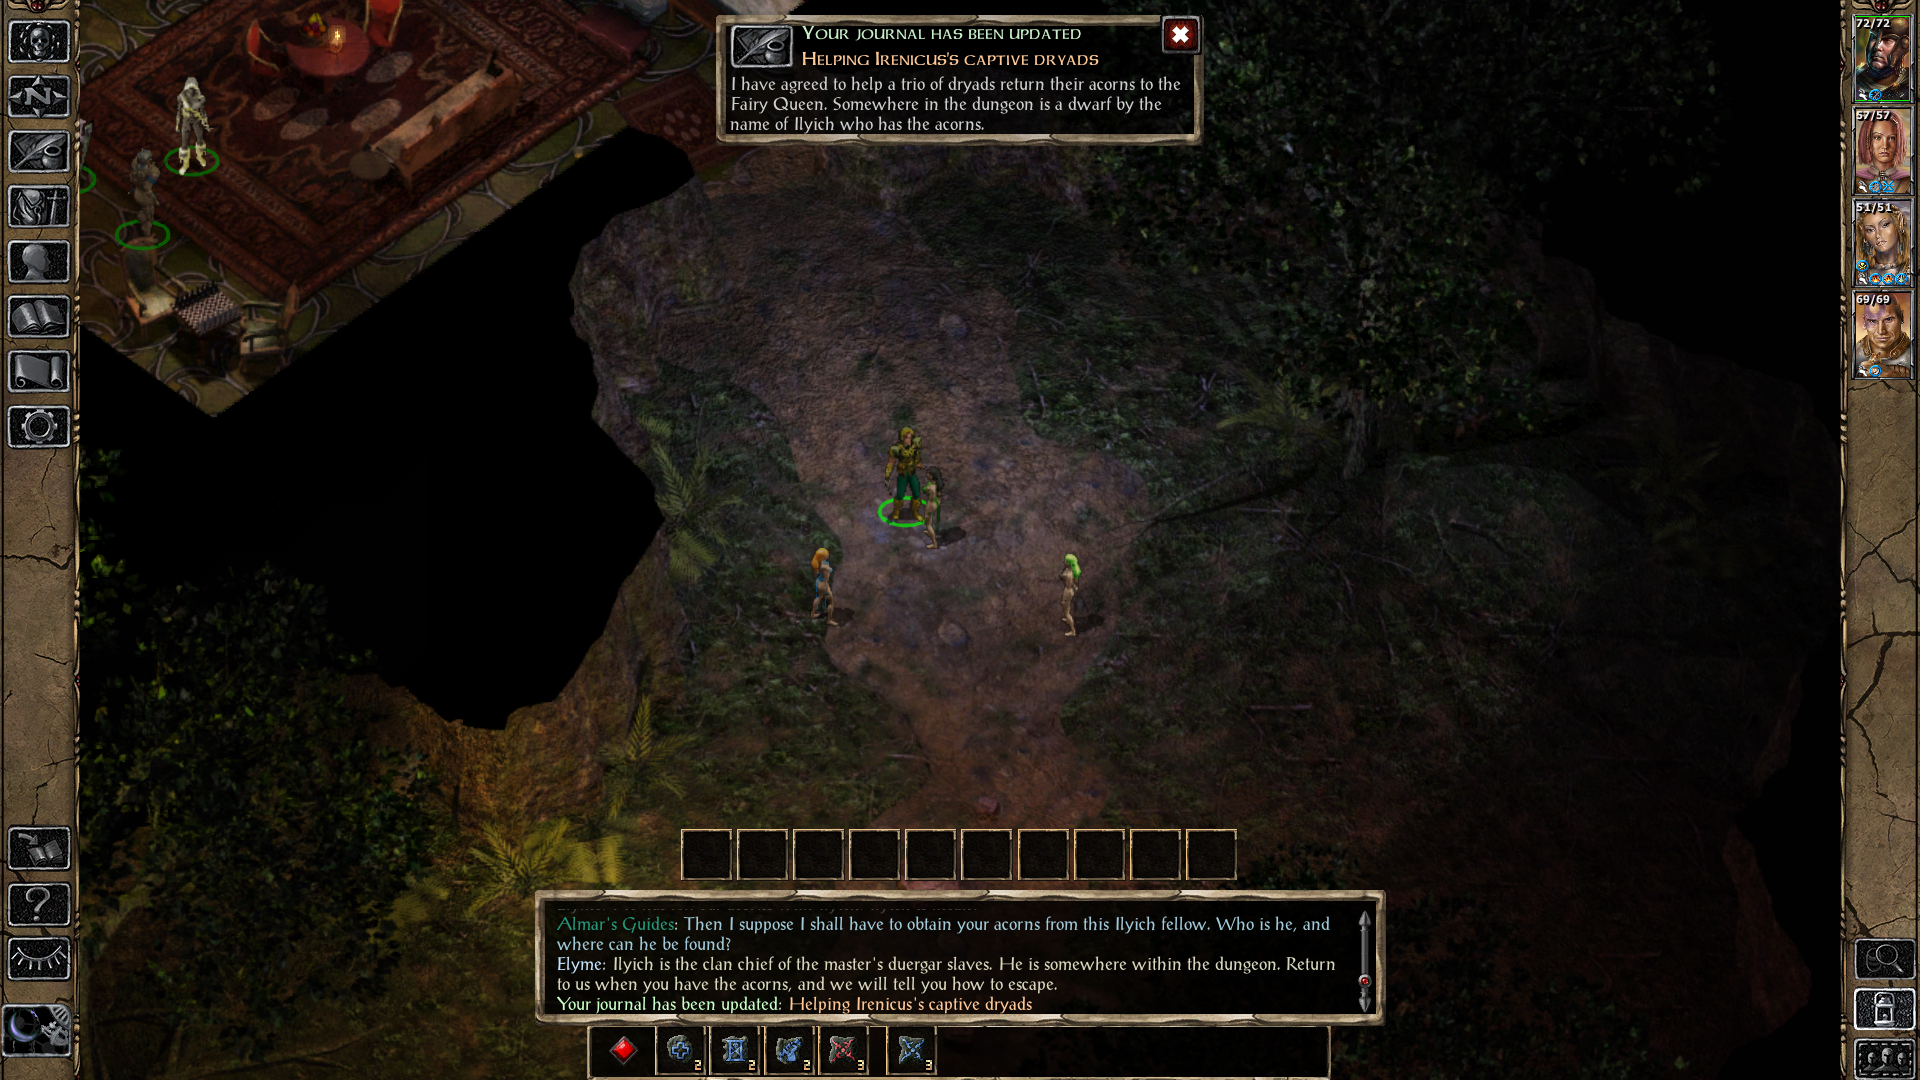 Helping Irenicus Captive Dryads Quest Start